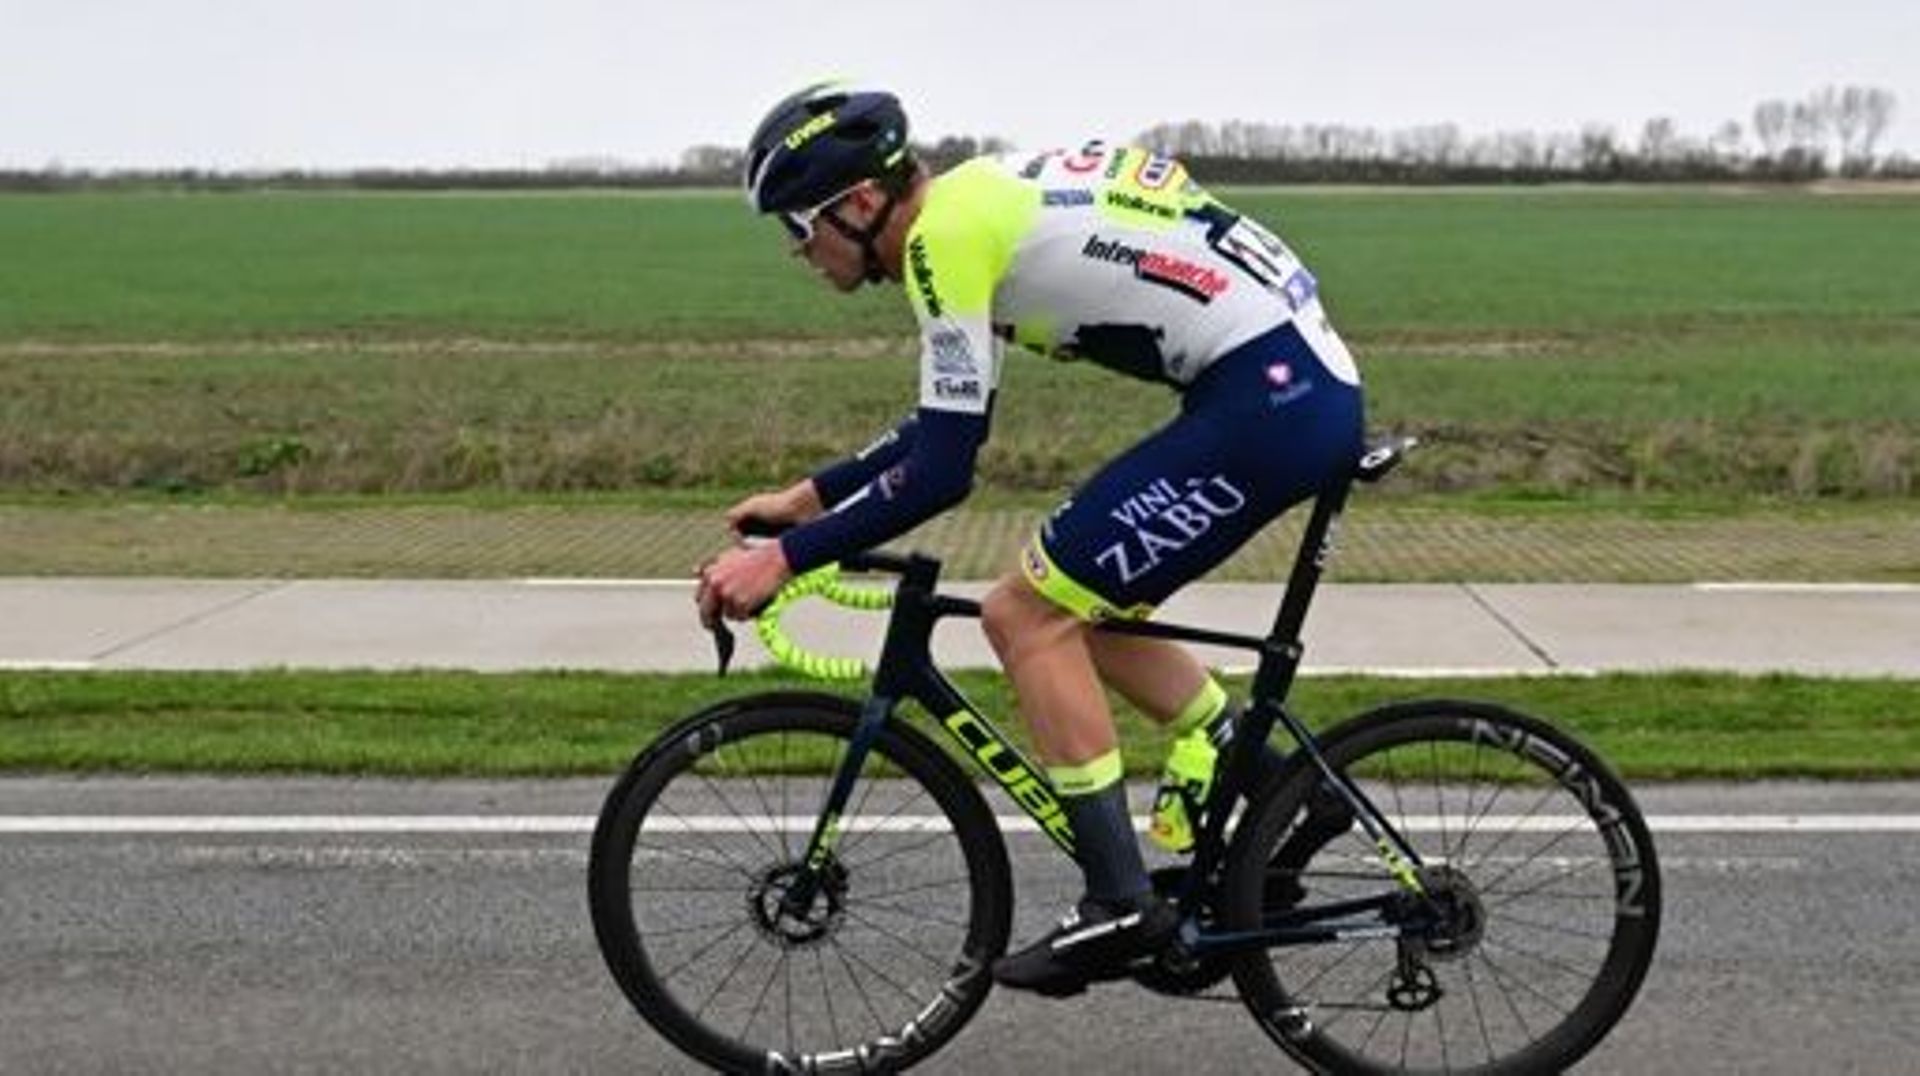 Belgian Laurenz Rex of Intermarche-Circus-Wanty pictured in action during the men's elite race of the 'Classic Brugge-De Panne' one-day cycling race, 207,4km from Brugge to De Panne, Wednesday 22 March 2023. BELGA PHOTO DIRK WAEM